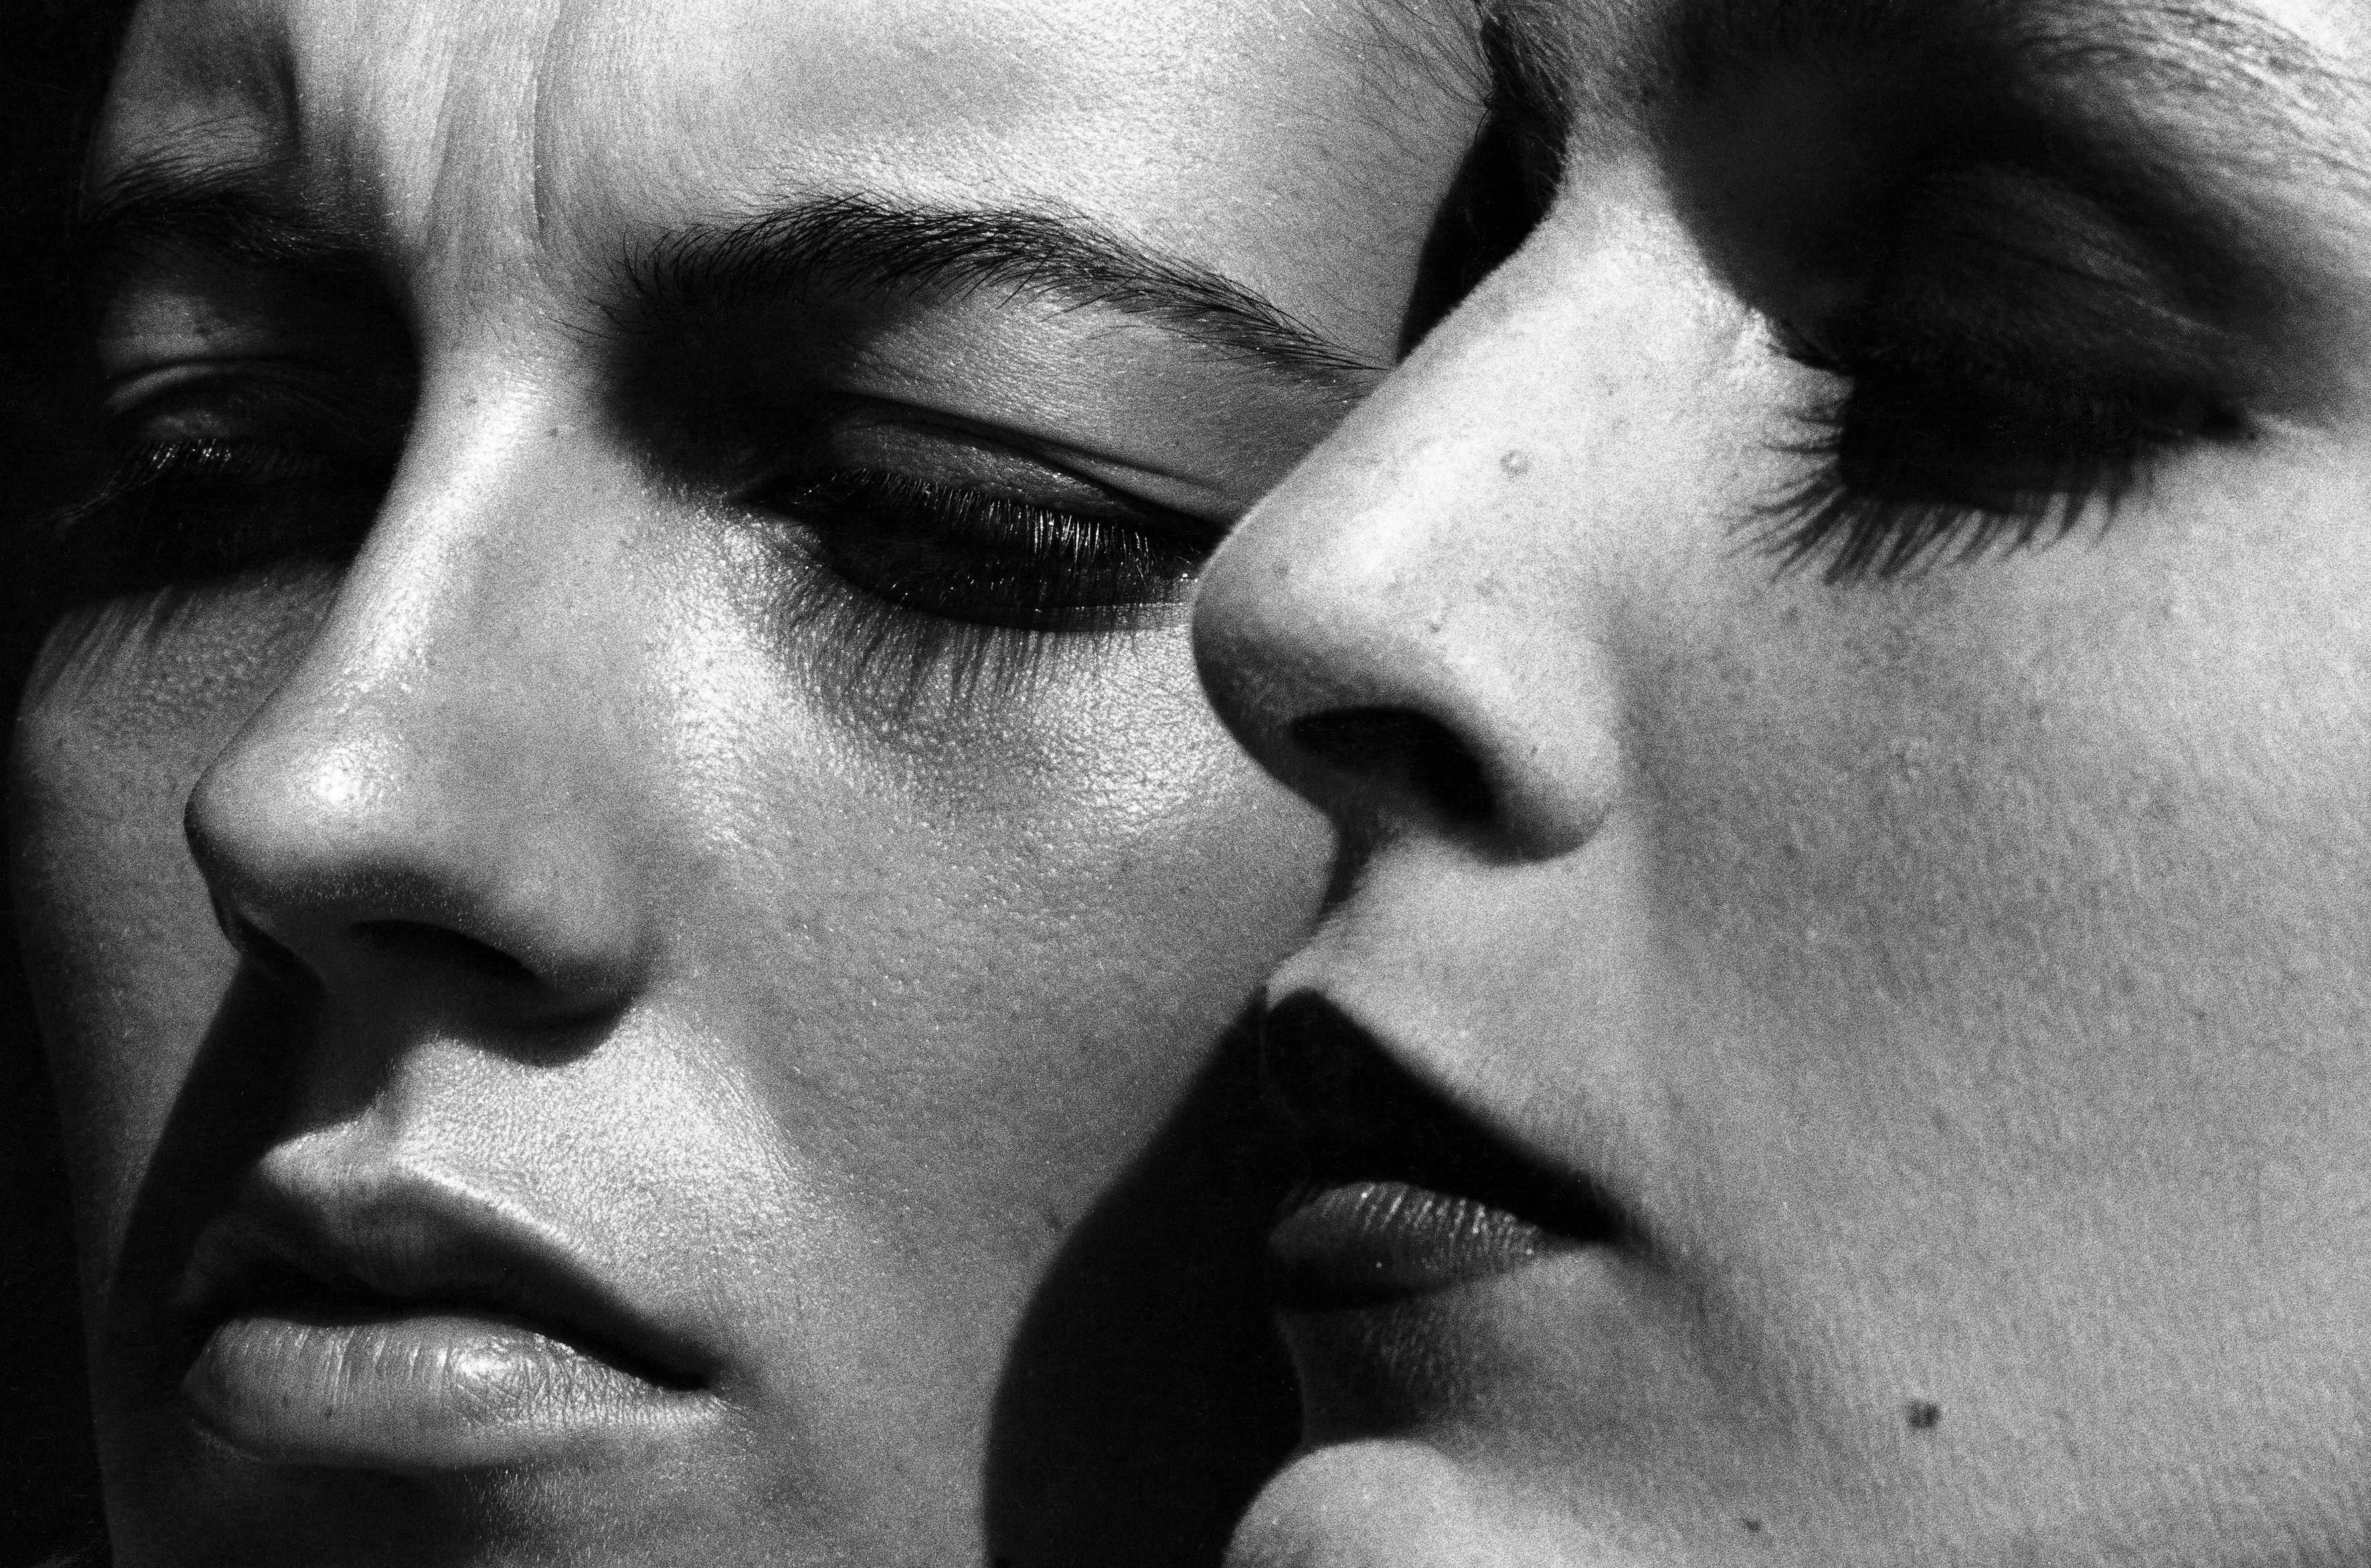 New Helmut Newton exhibition revealed to land in Spain this autumn